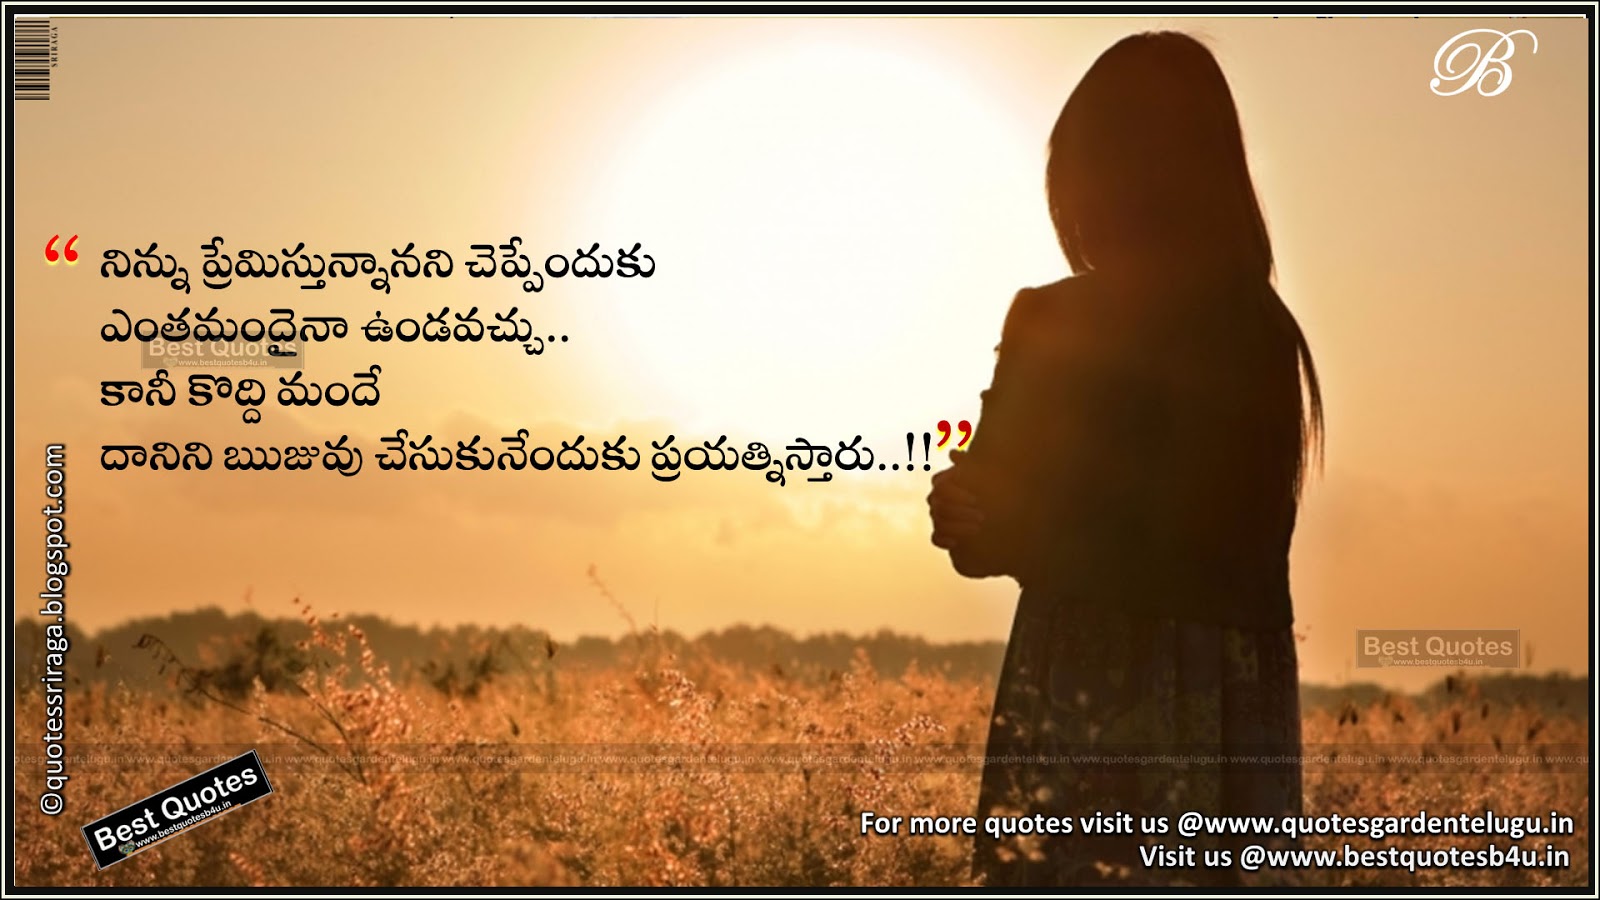 Download Best Heart Touching Wallpapers With Quotes - Telugu Heart Touching  - 1600x900 Wallpaper 